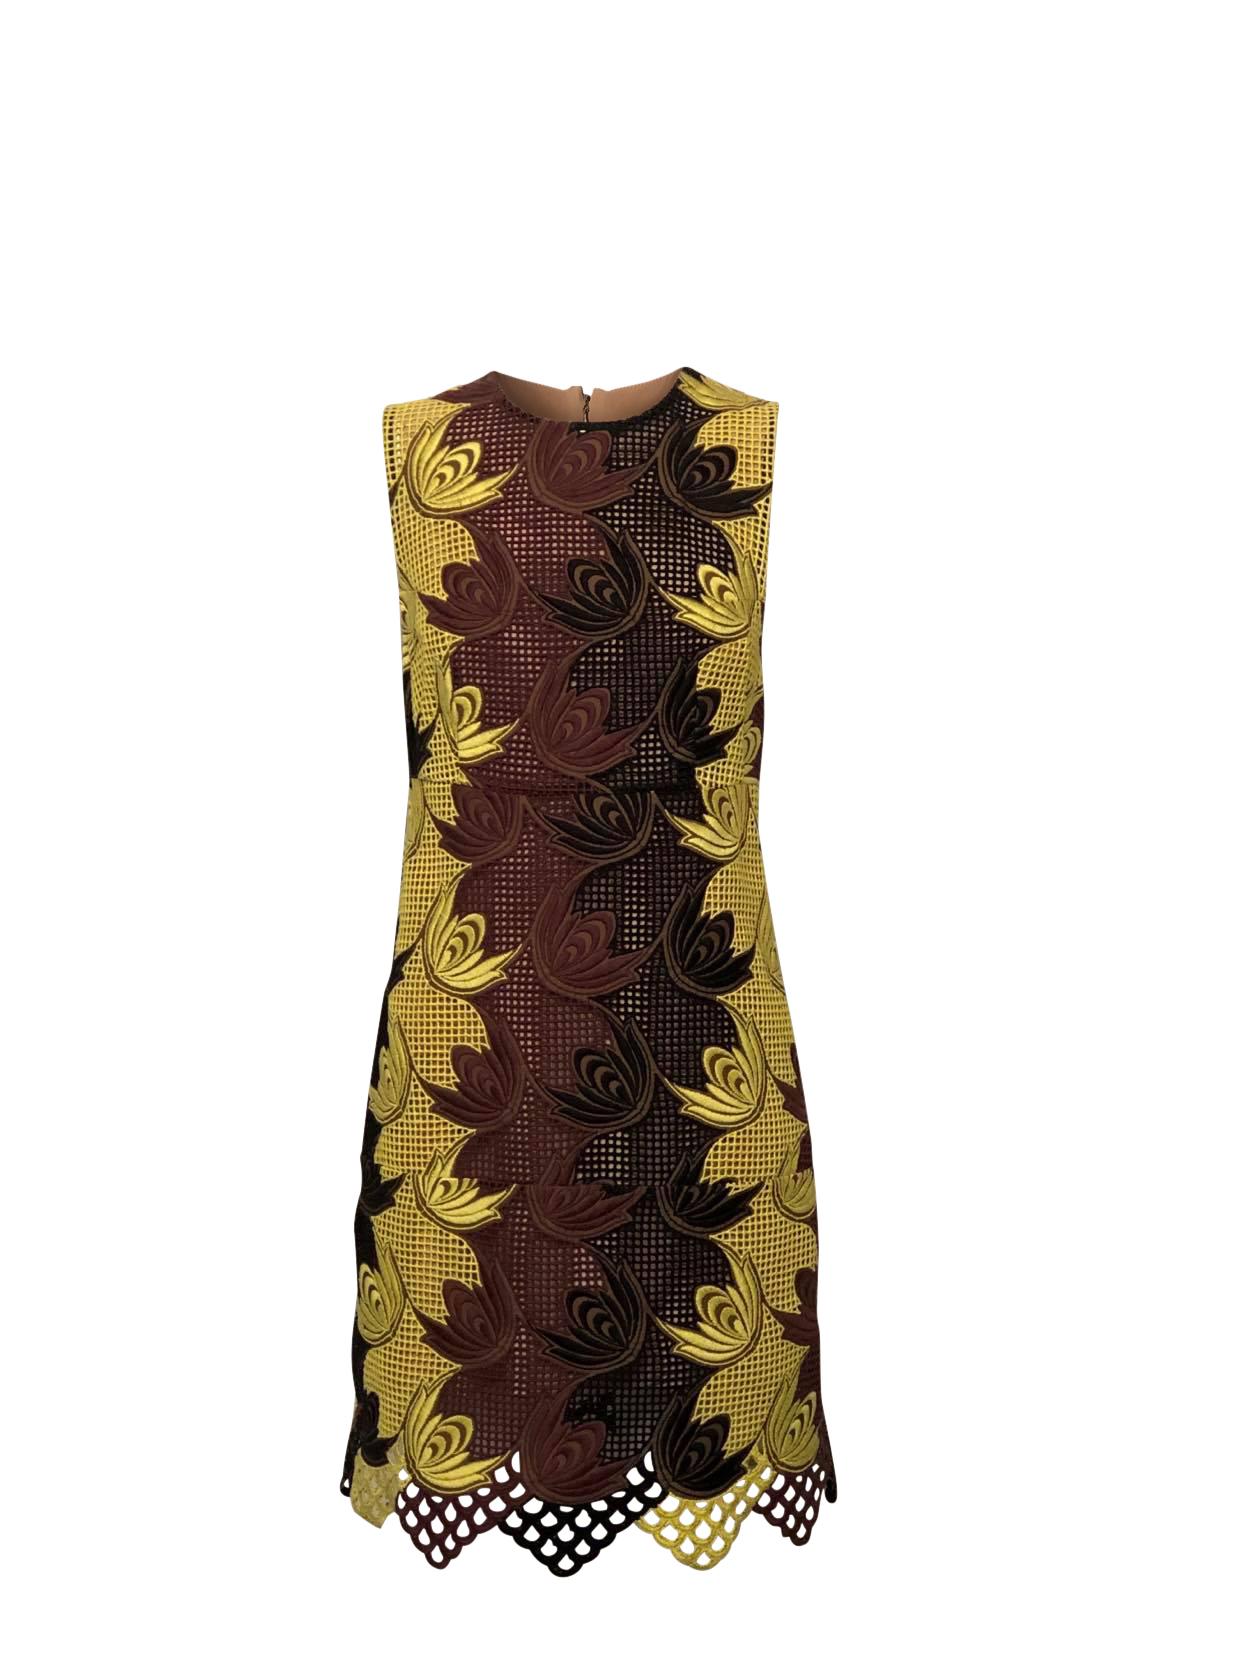 Gorgeous MARNI mini shift dress in earthy green, black and brown floral embroidery. This beautiful dress features an inbuilt nude silk lining.

65% acrylic 35% silk

Made in Italy.